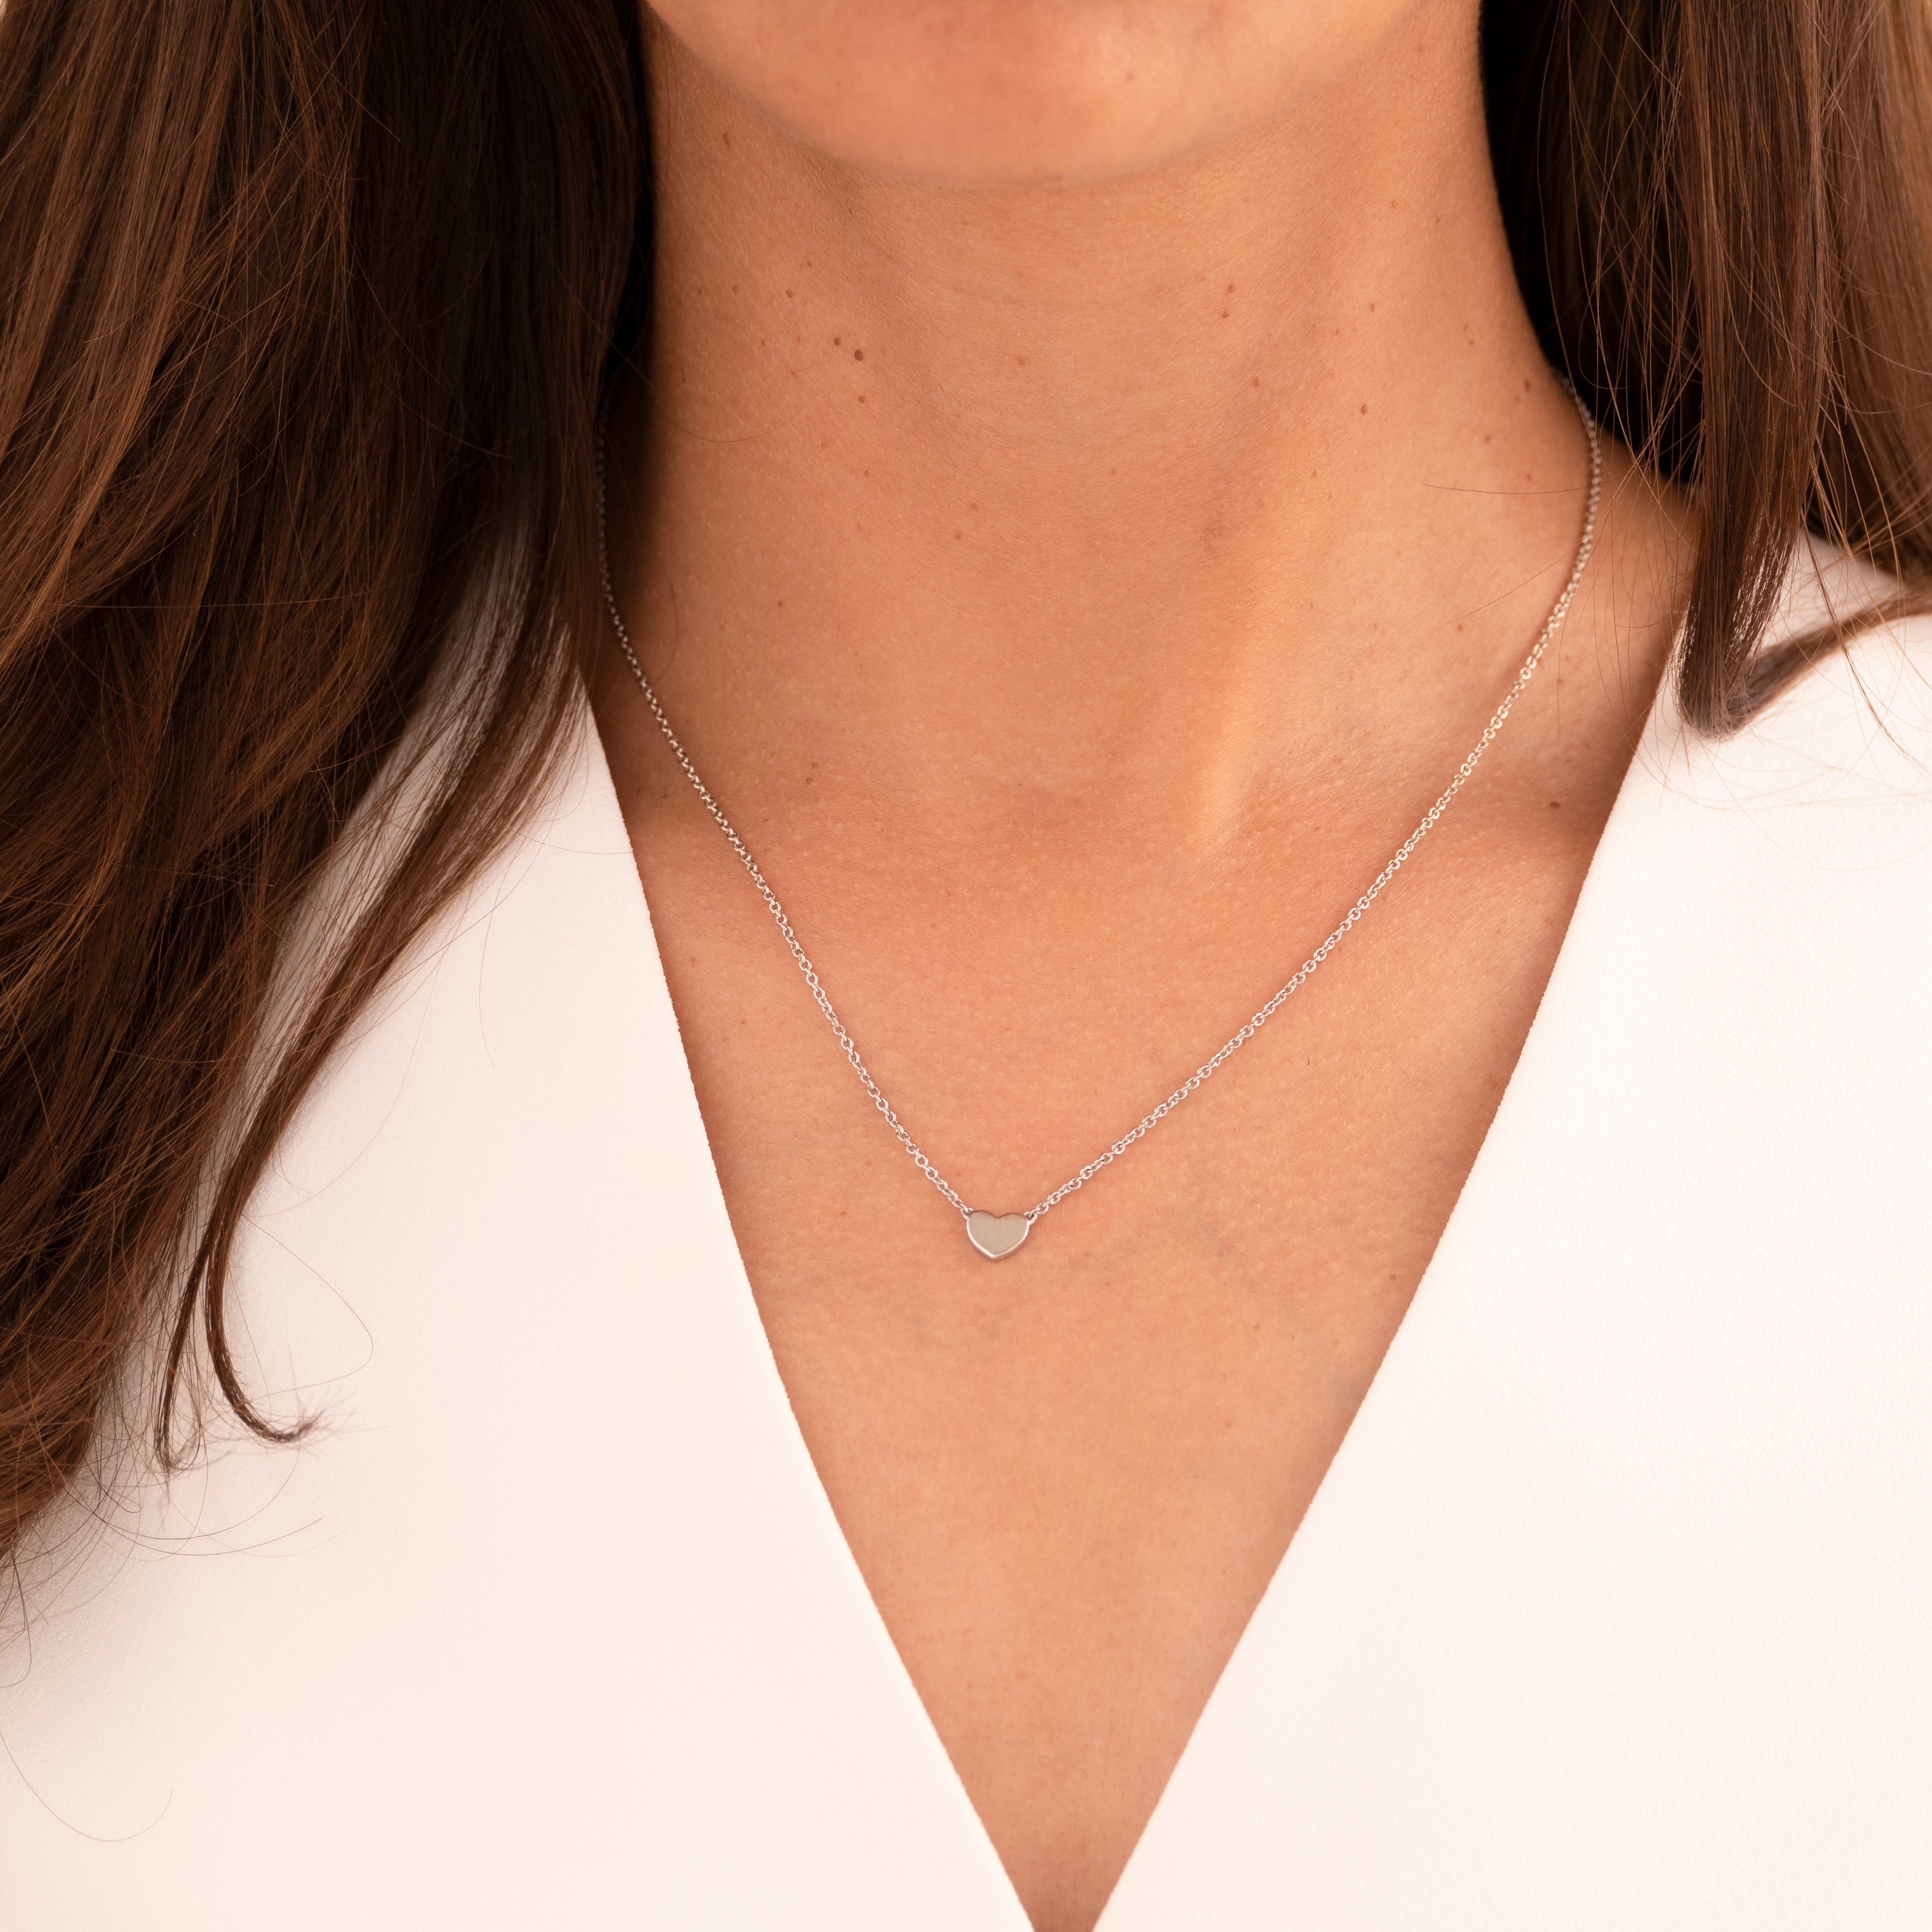 Gisser Jewels Silver Rhodium Plated Minimal Heart Necklace